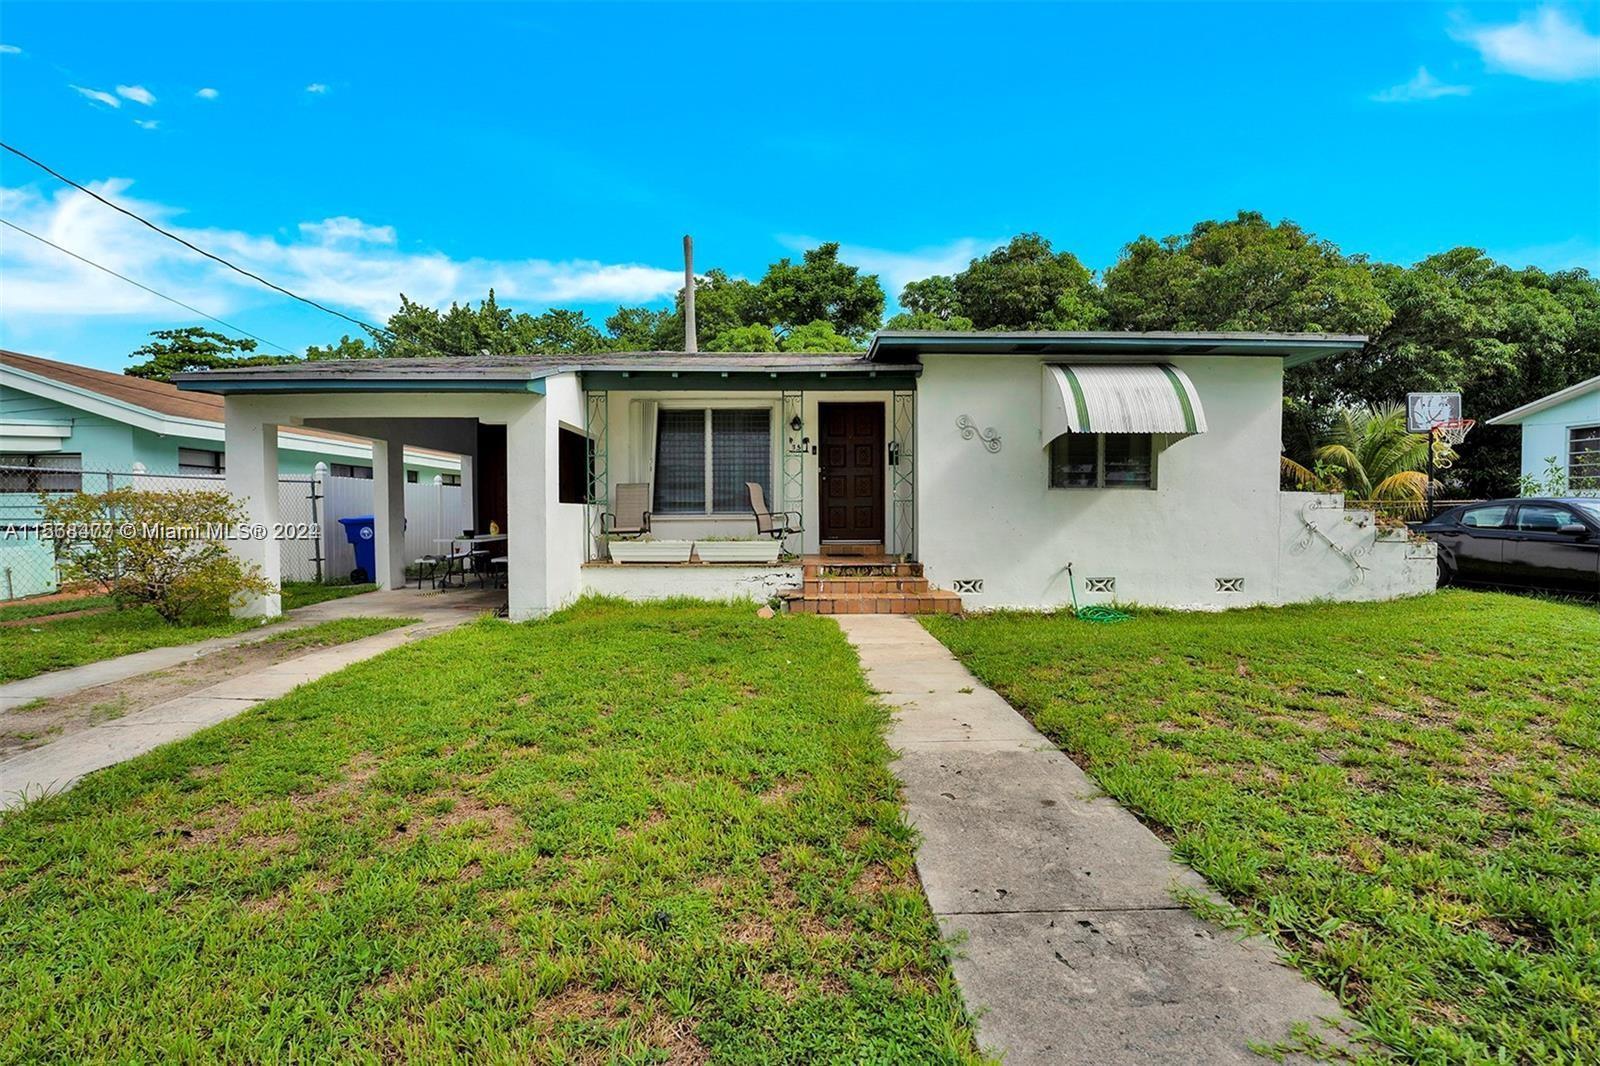 Photo of 75 NW 41st St in Miami, FL